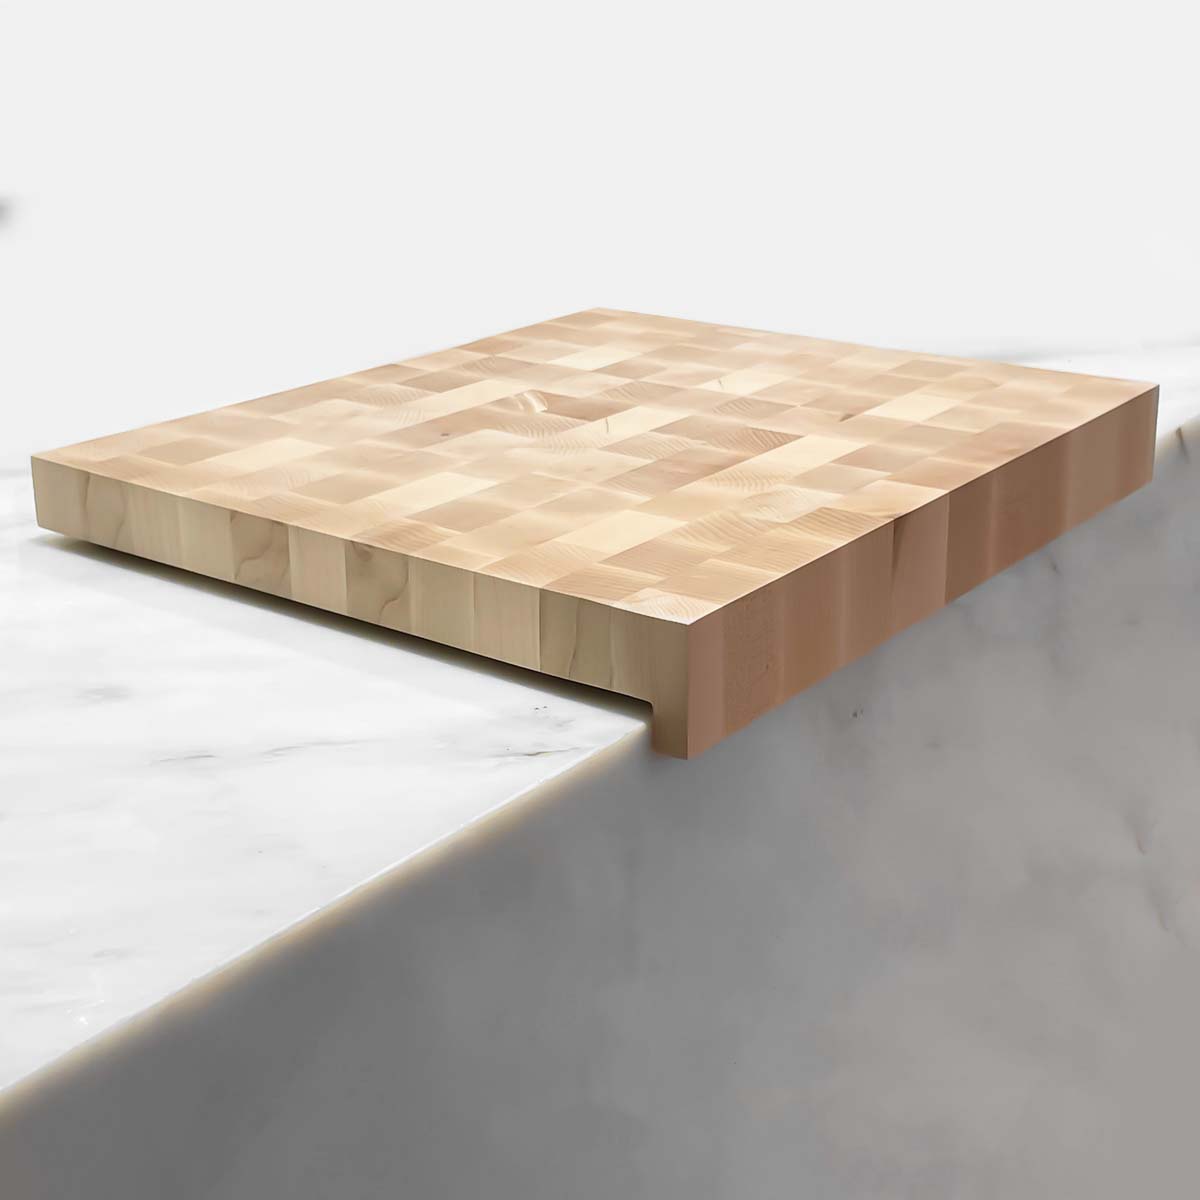 Maple Over The Counter End Grain Cutting Board